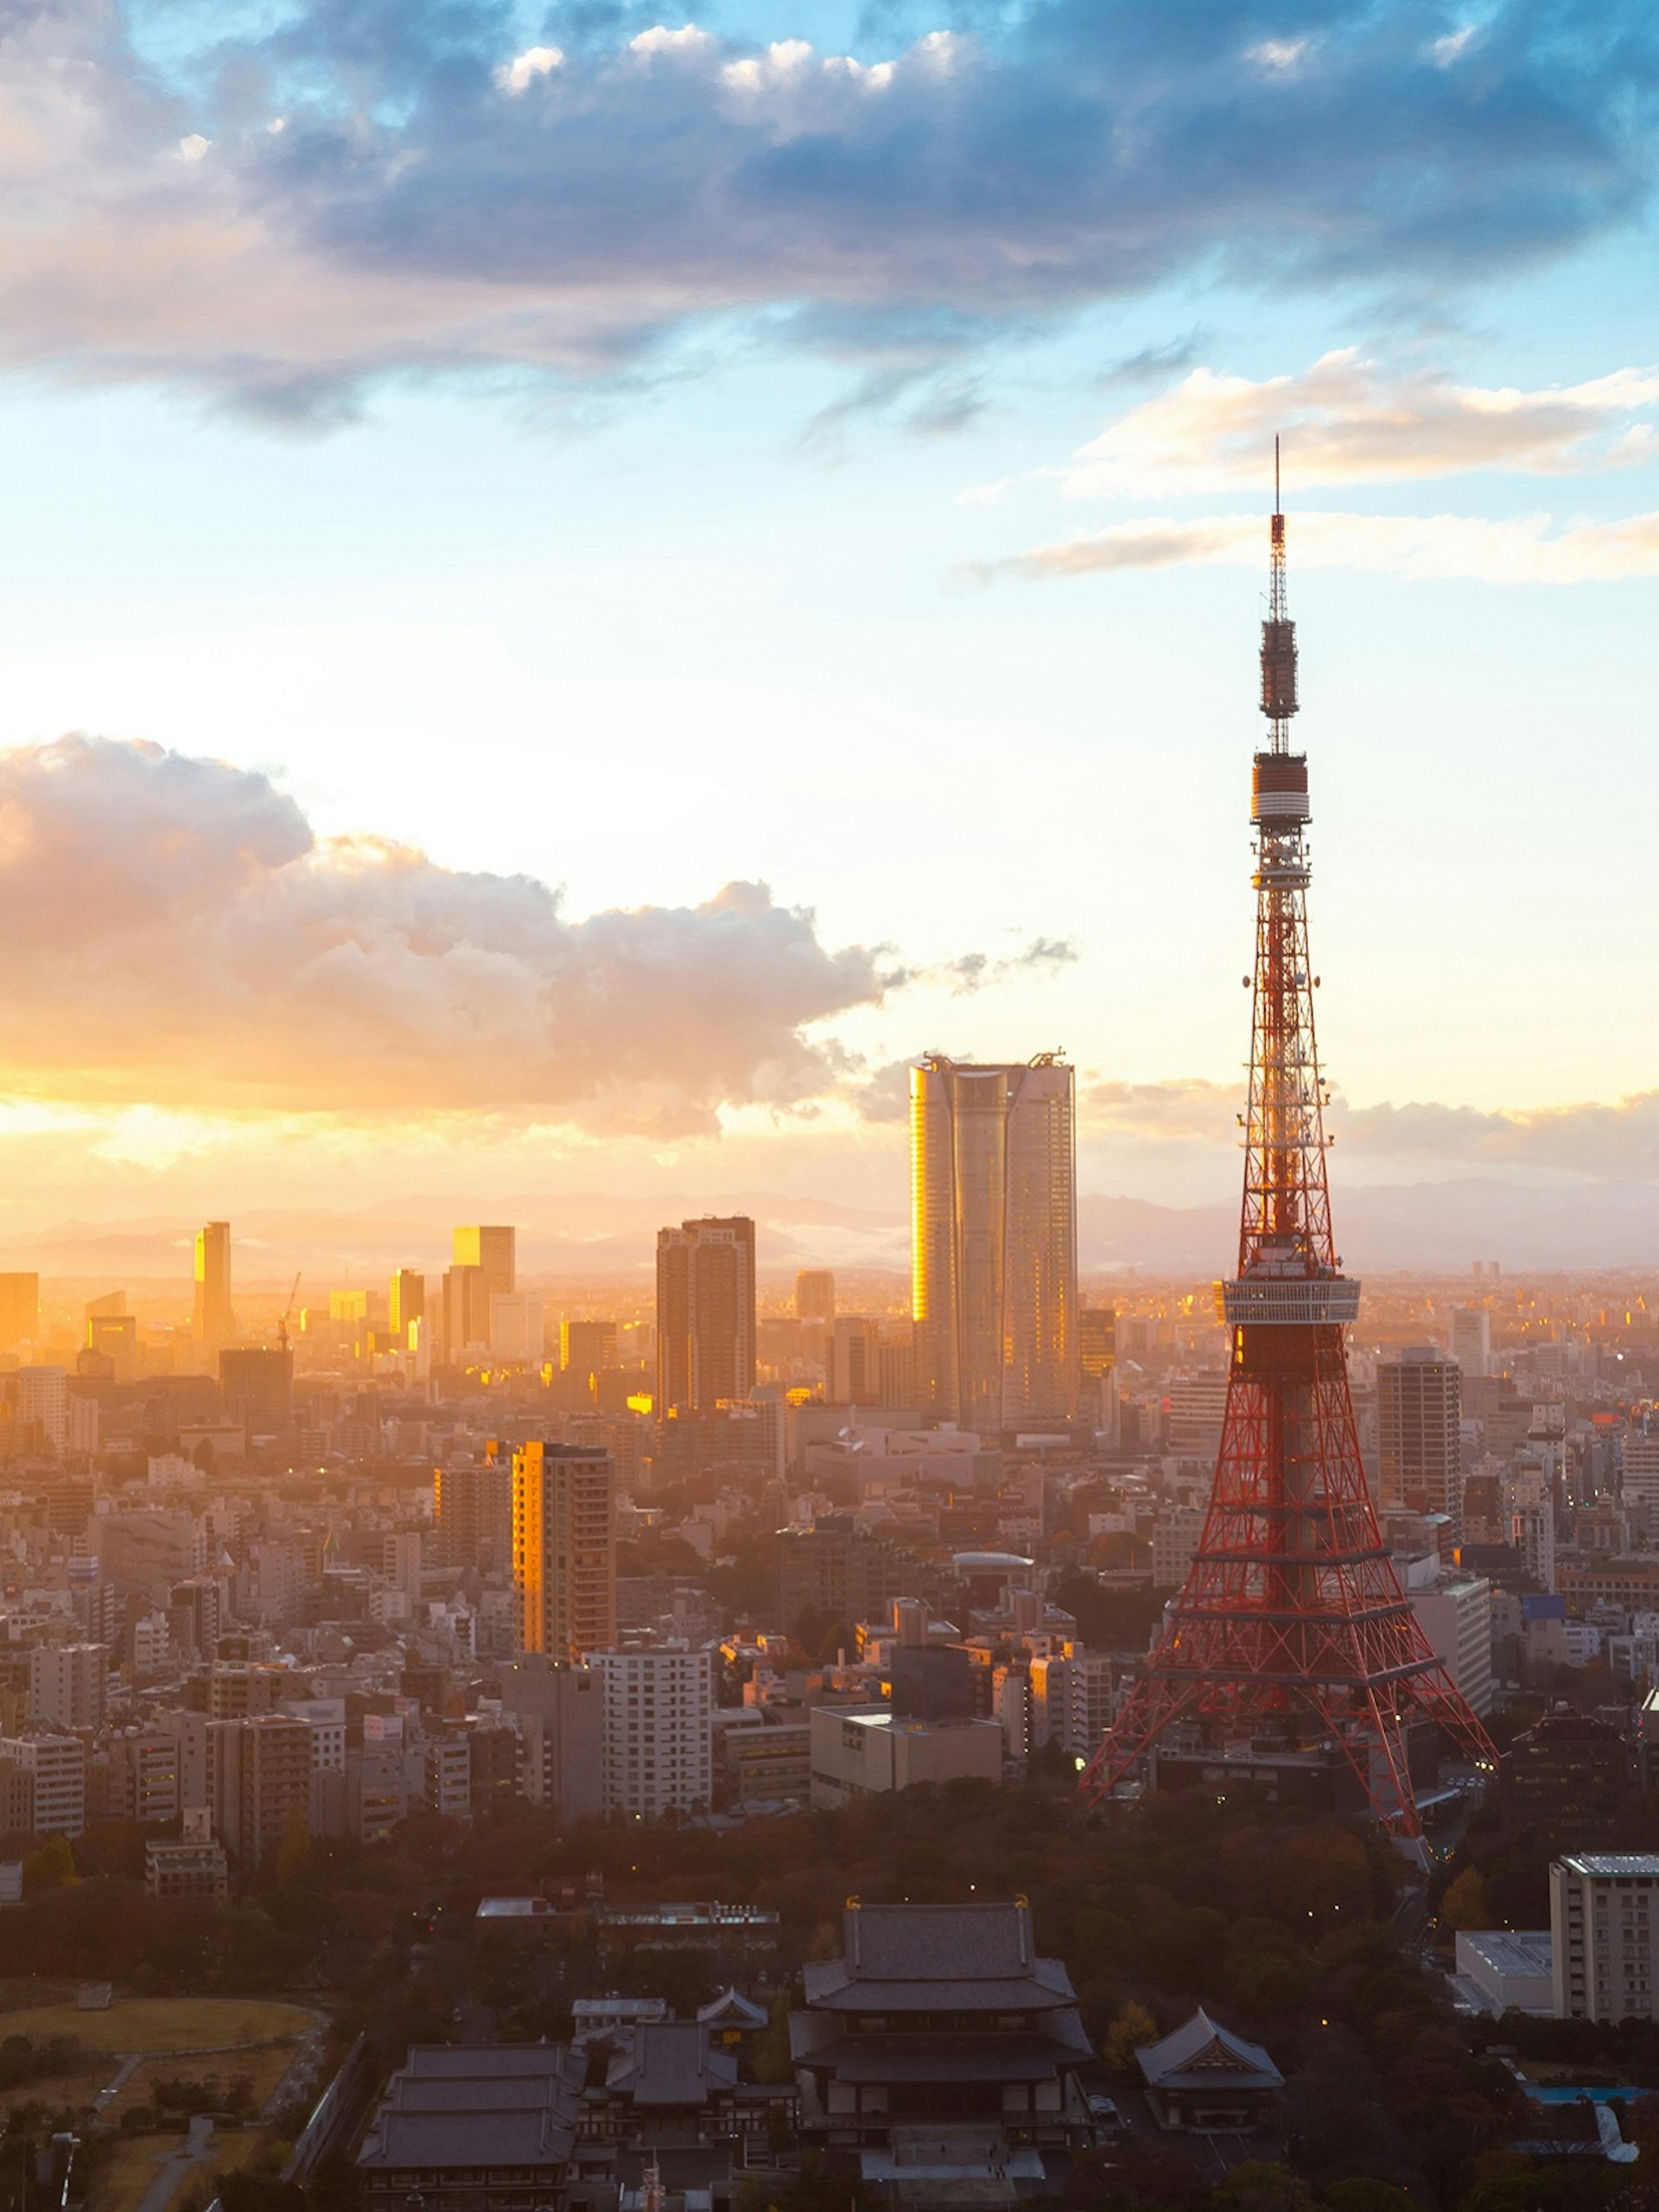 Aerial view of the Tokyo Tower cityscape sunset at dusk in Japan.